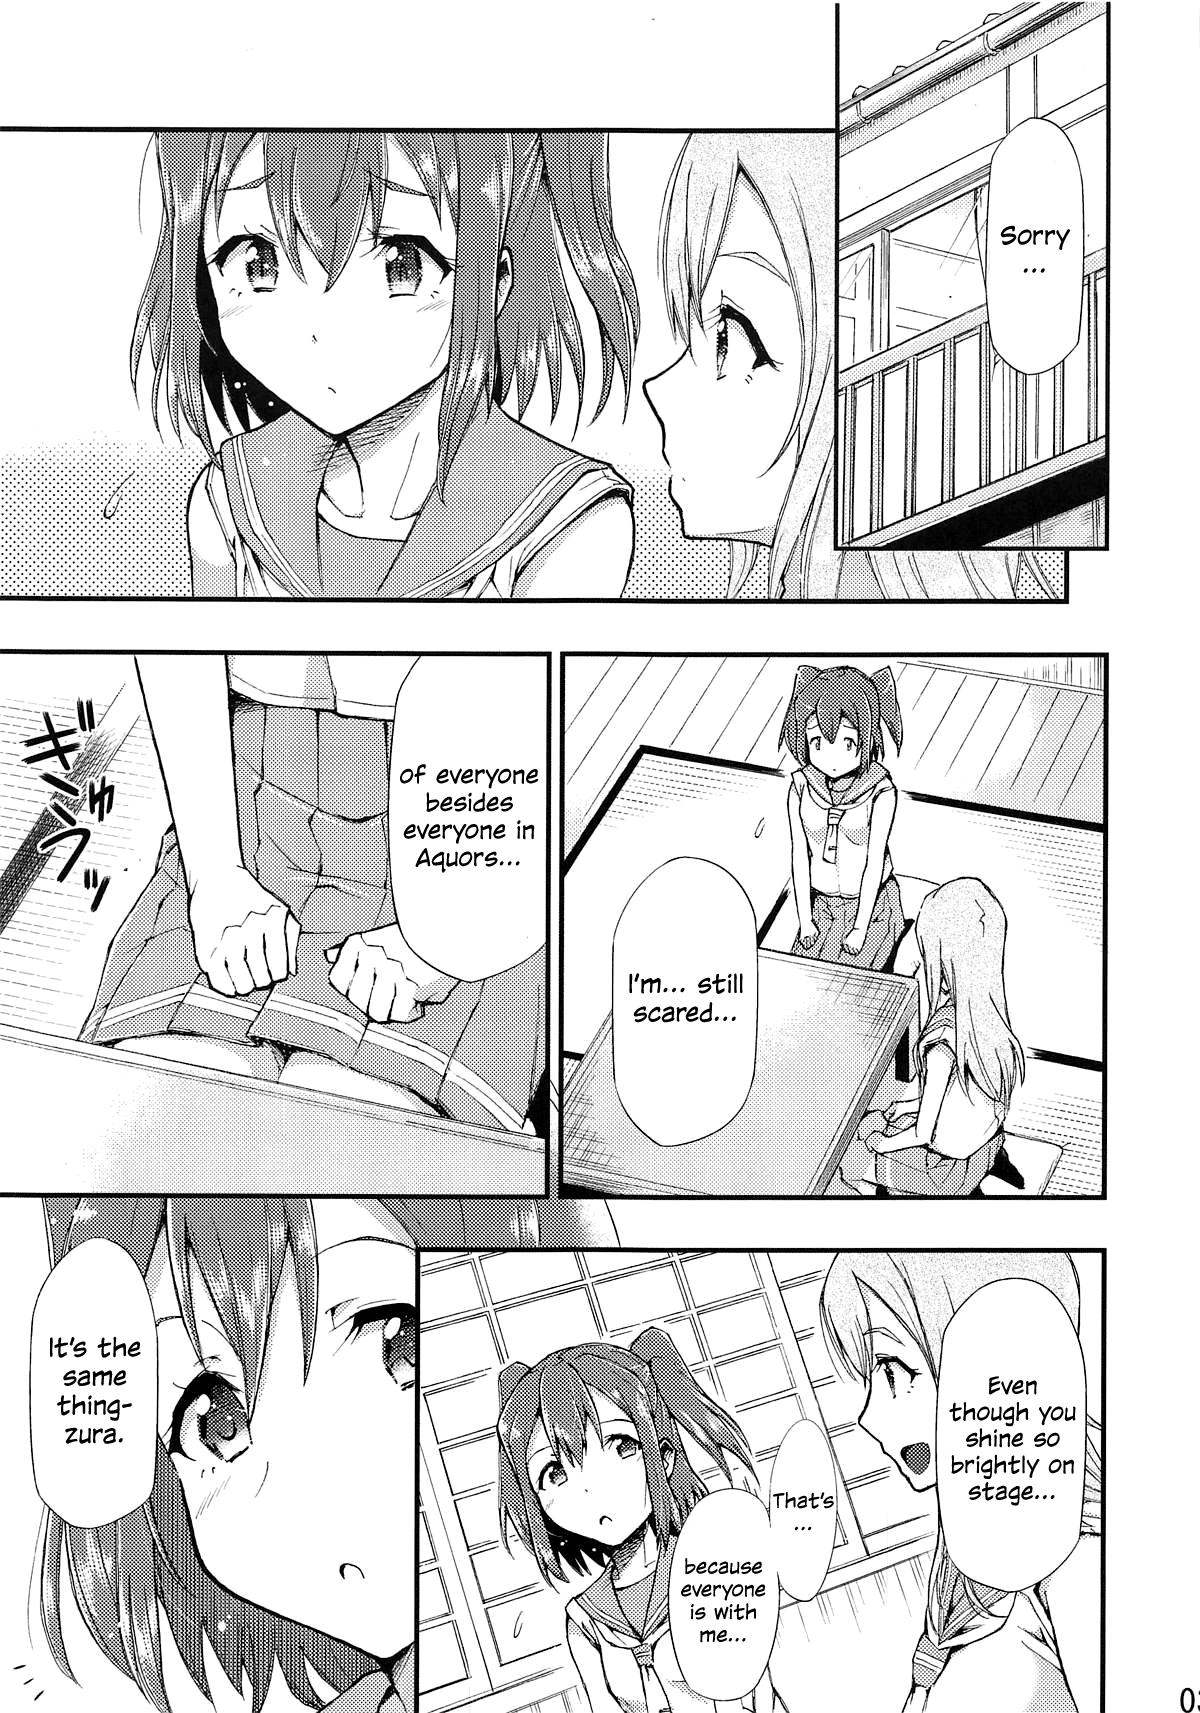 Story Omoitagai | Thinking of Each Other - Love live sunshine Cougars - Page 4